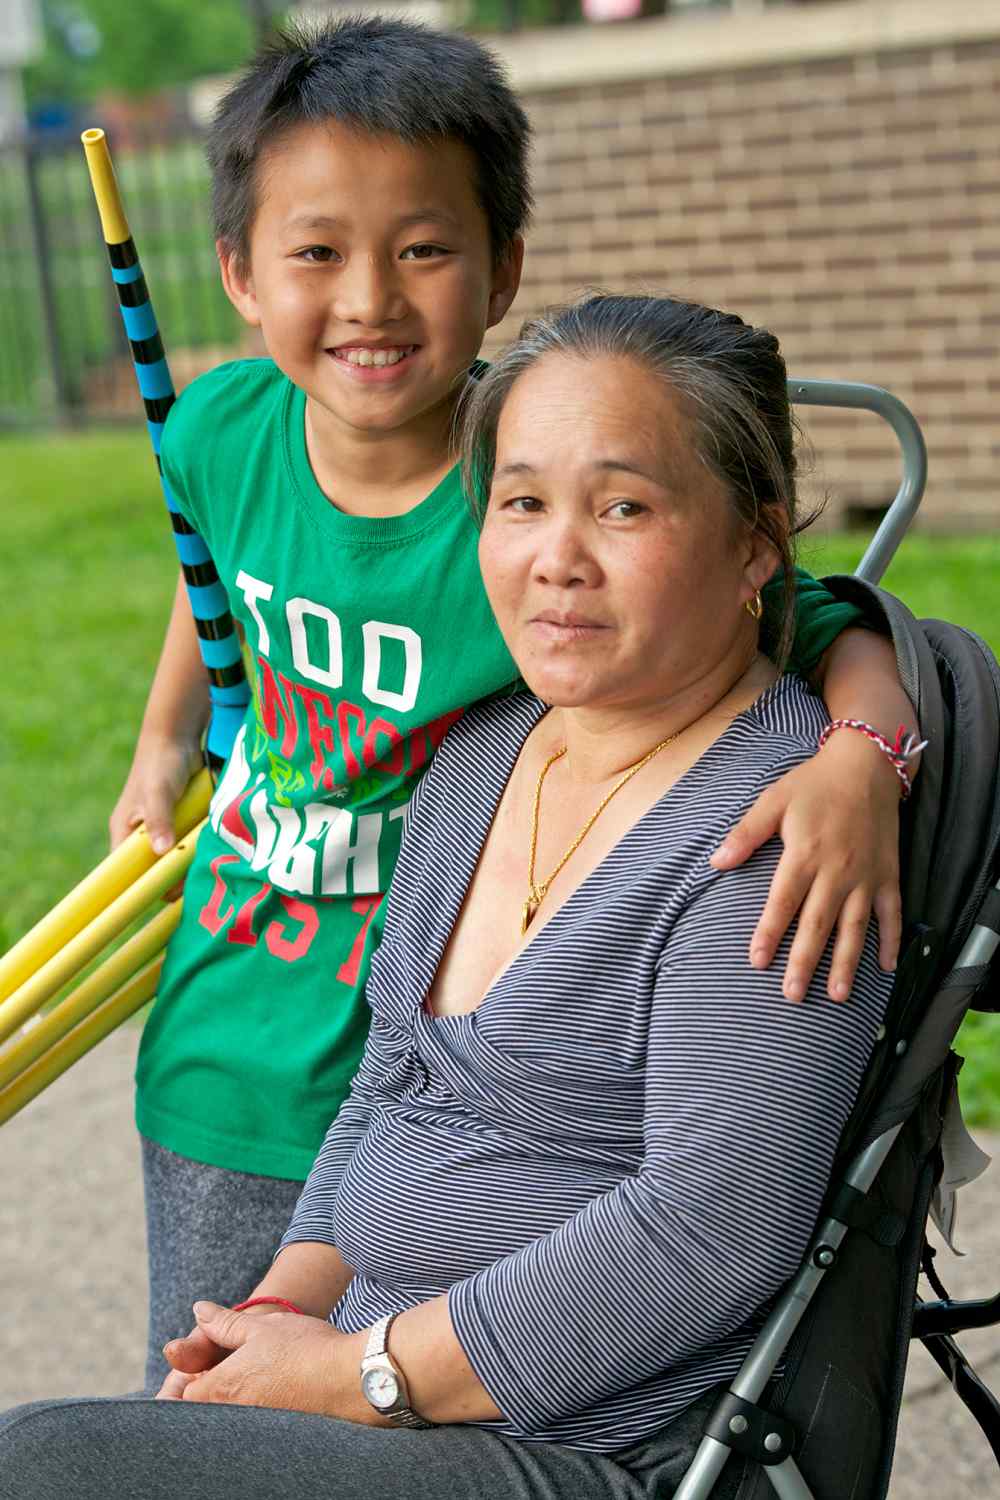 Wilder Community Mental Health and Wellness offers culturally-relevant school-based mental health services for Hmong students and their families in schools in Saint Paul, Minnesota and Twin Cities.